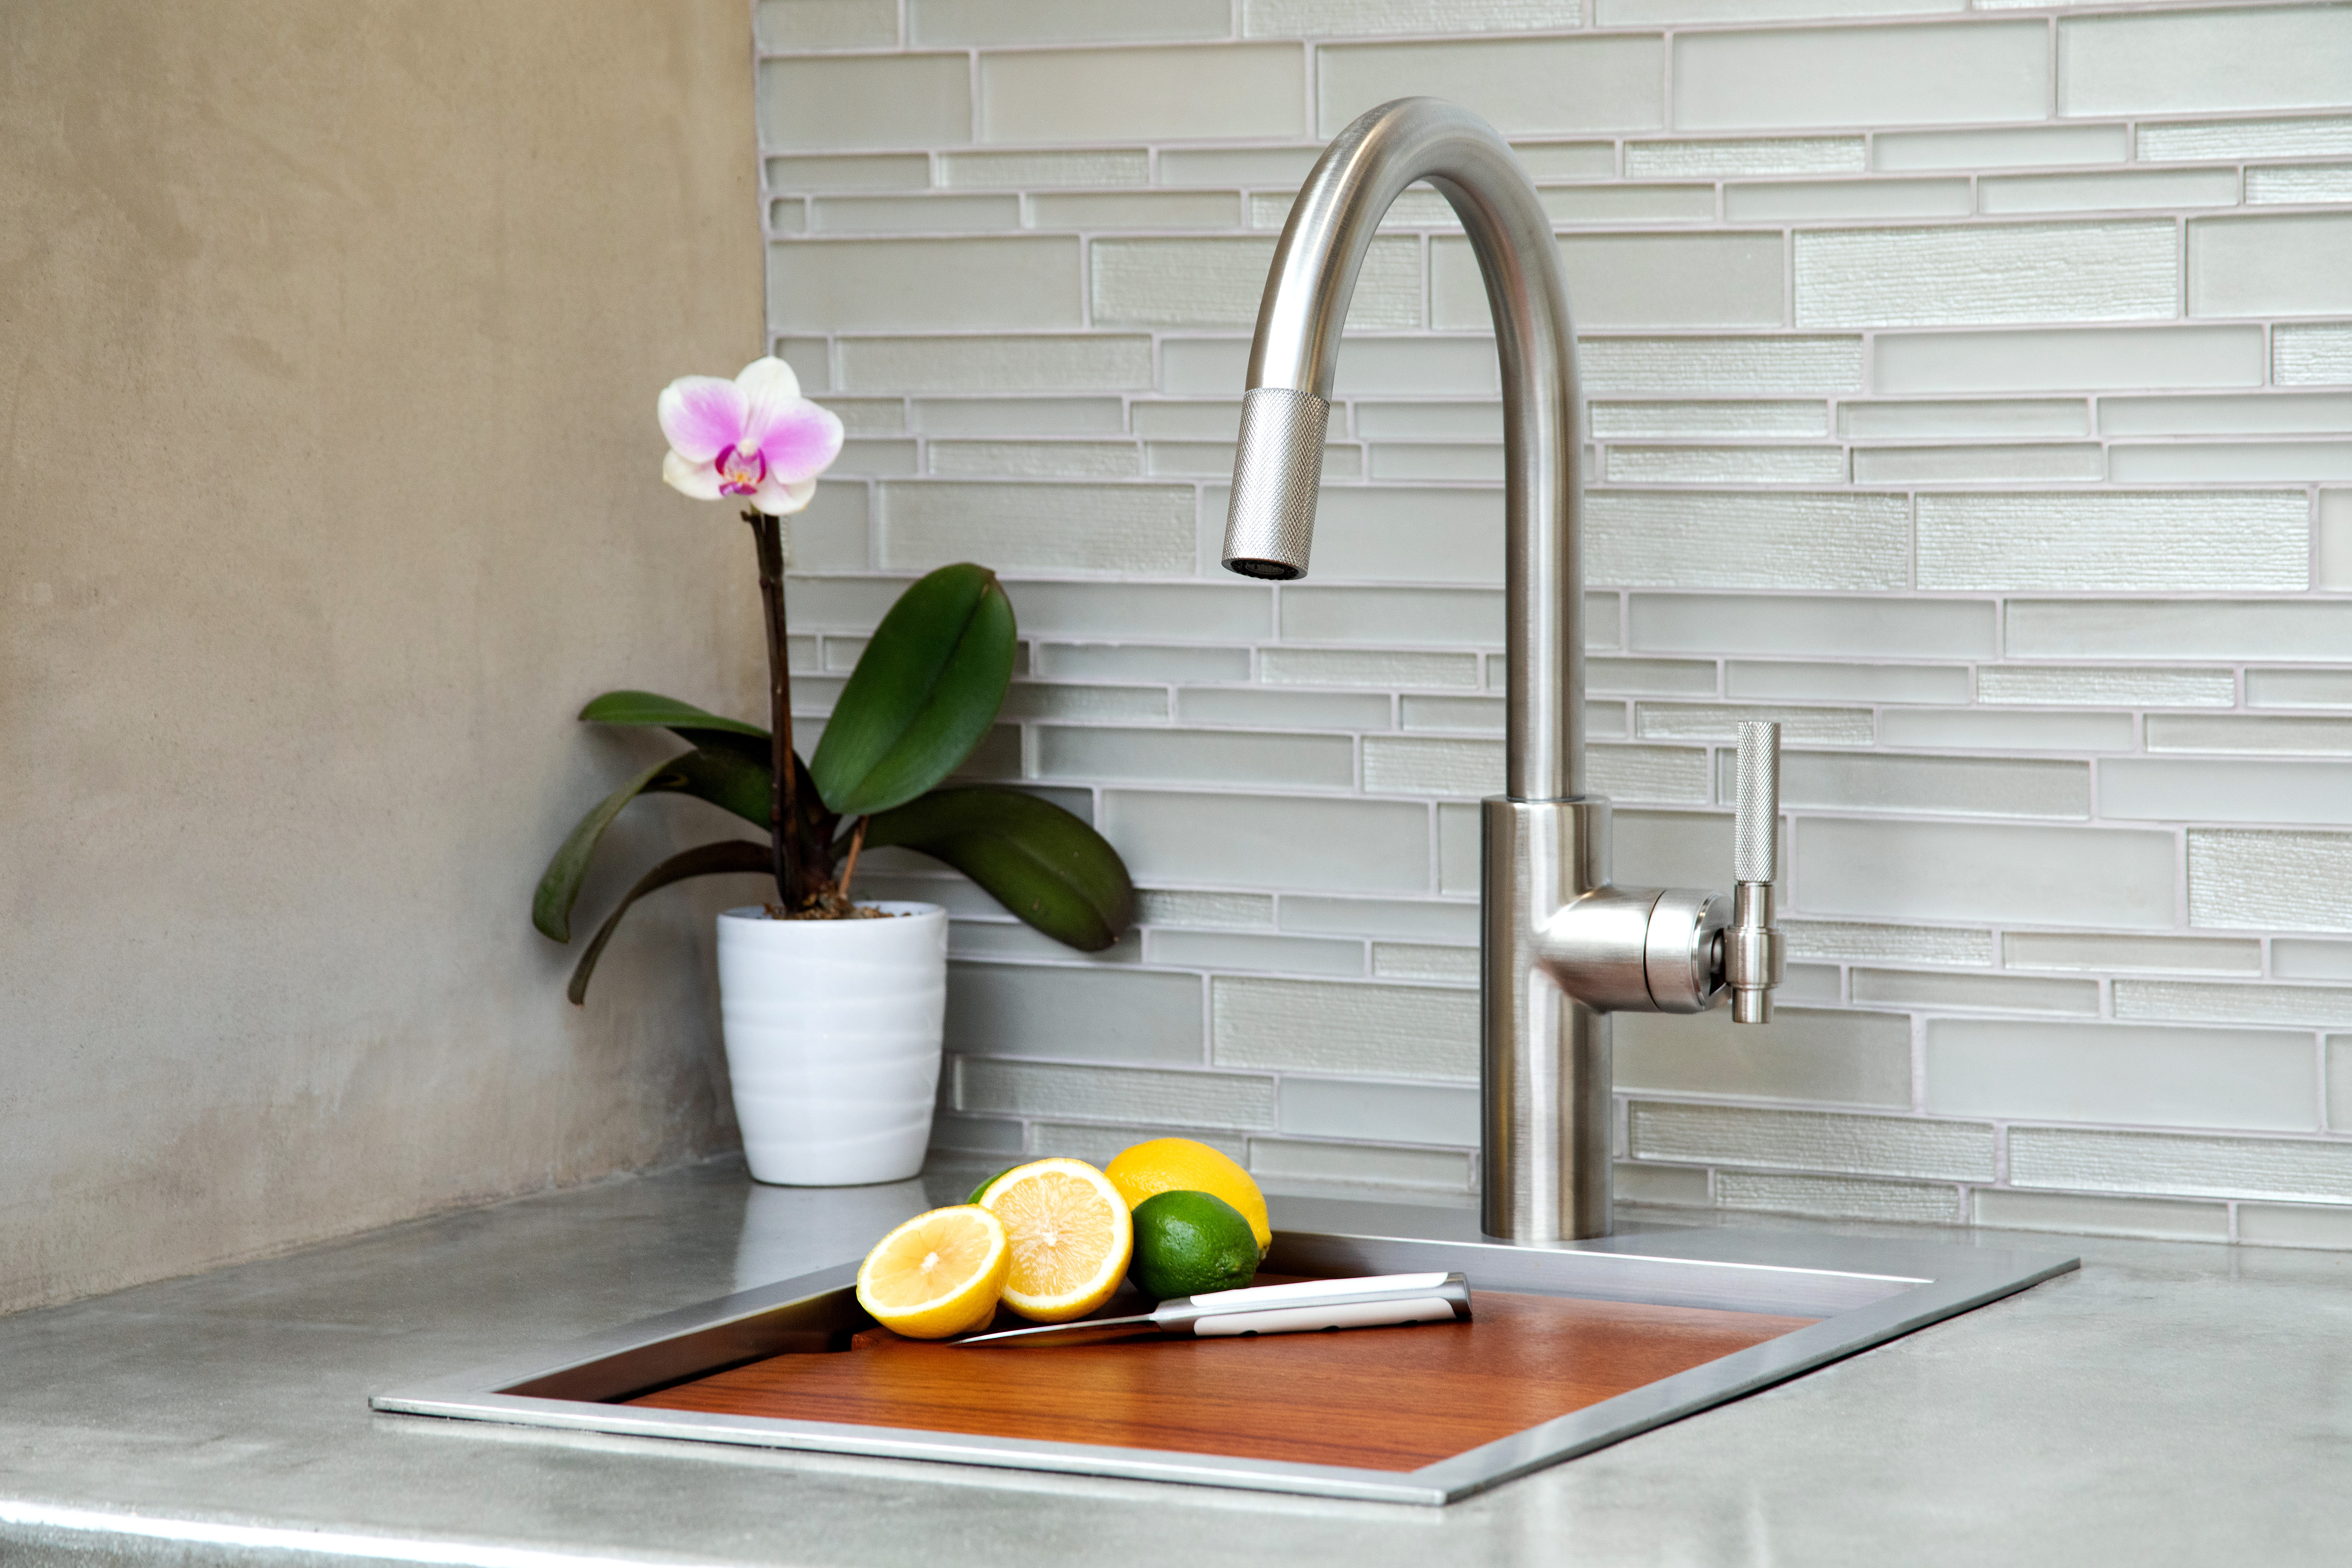 Newport Brass Launches New Industrial Inspired Kitchen Collection Residential Products Online